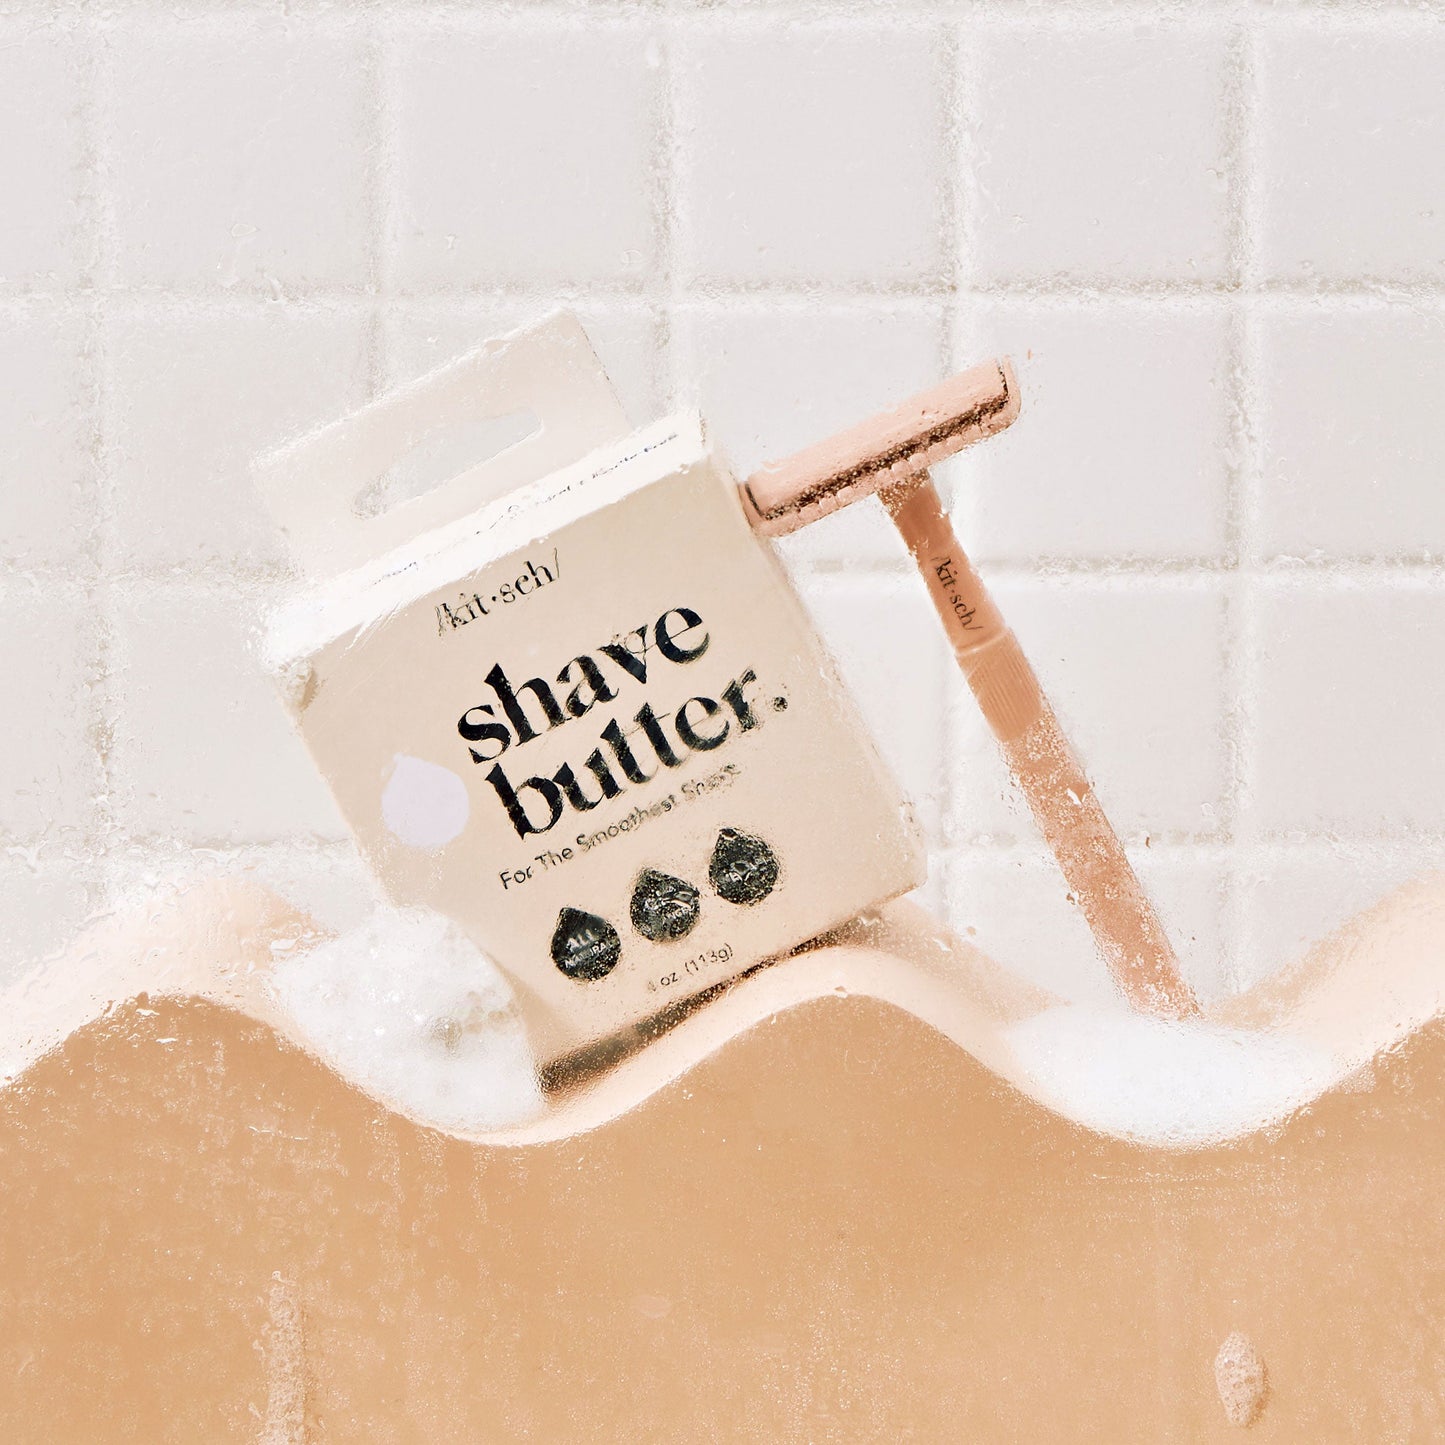 Solid Shave Butter by KITSCH - Lotus and Willow